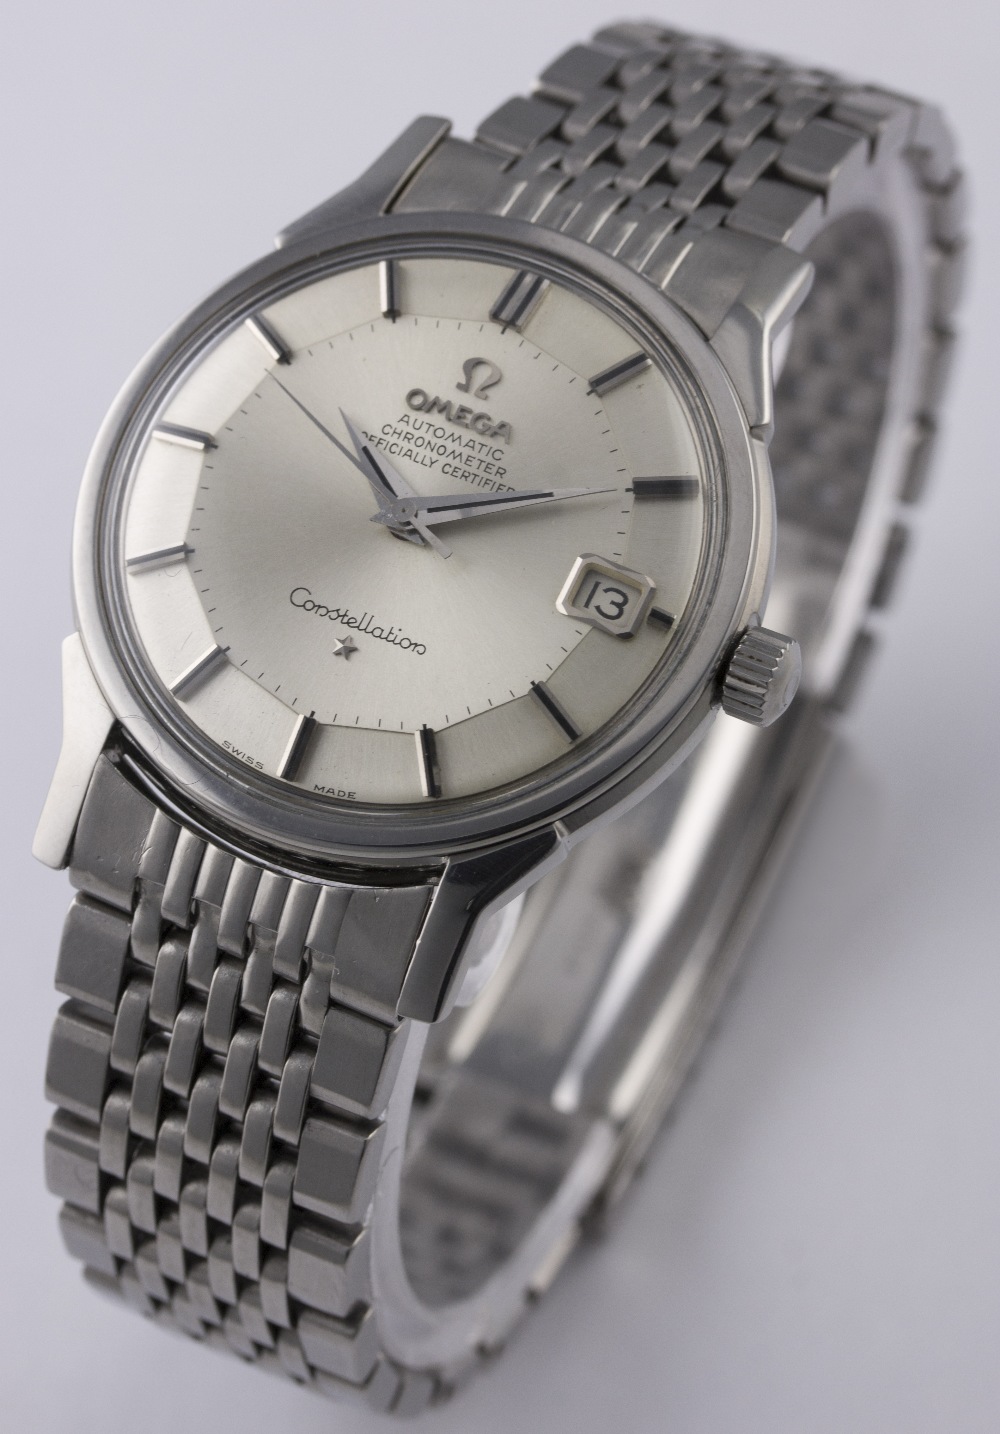 A GENTLEMAN'S STAINLESS STEEL OMEGA CONSTELLATION CHRONOMETER BRACELET WATCH CIRCA 1967, REF. 168. - Image 4 of 9